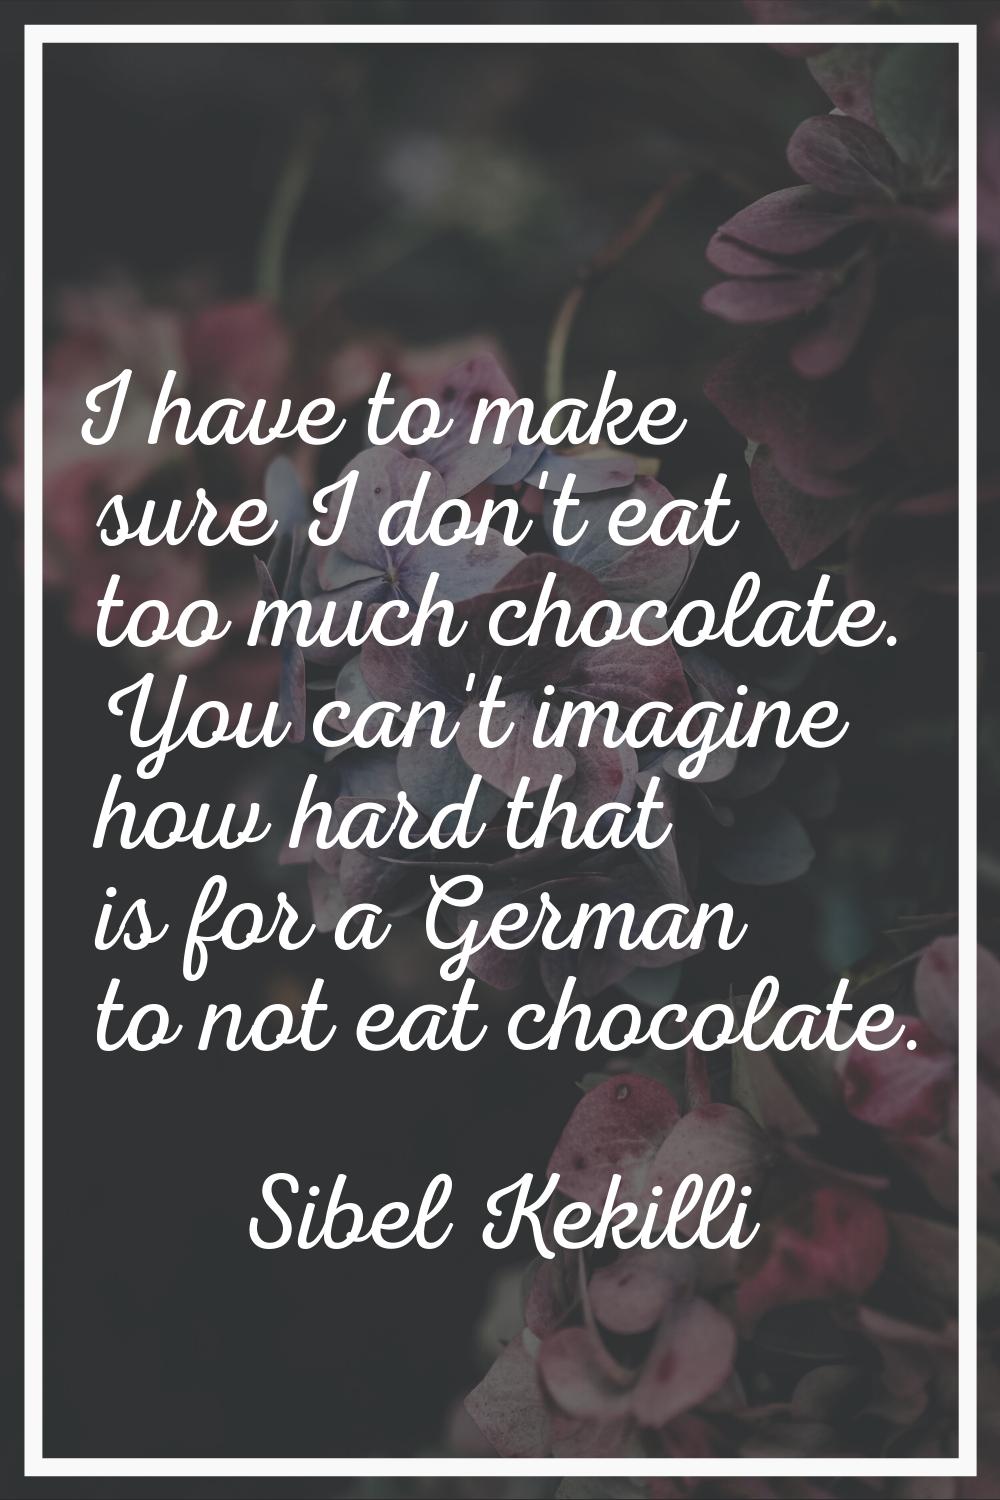 I have to make sure I don't eat too much chocolate. You can't imagine how hard that is for a German